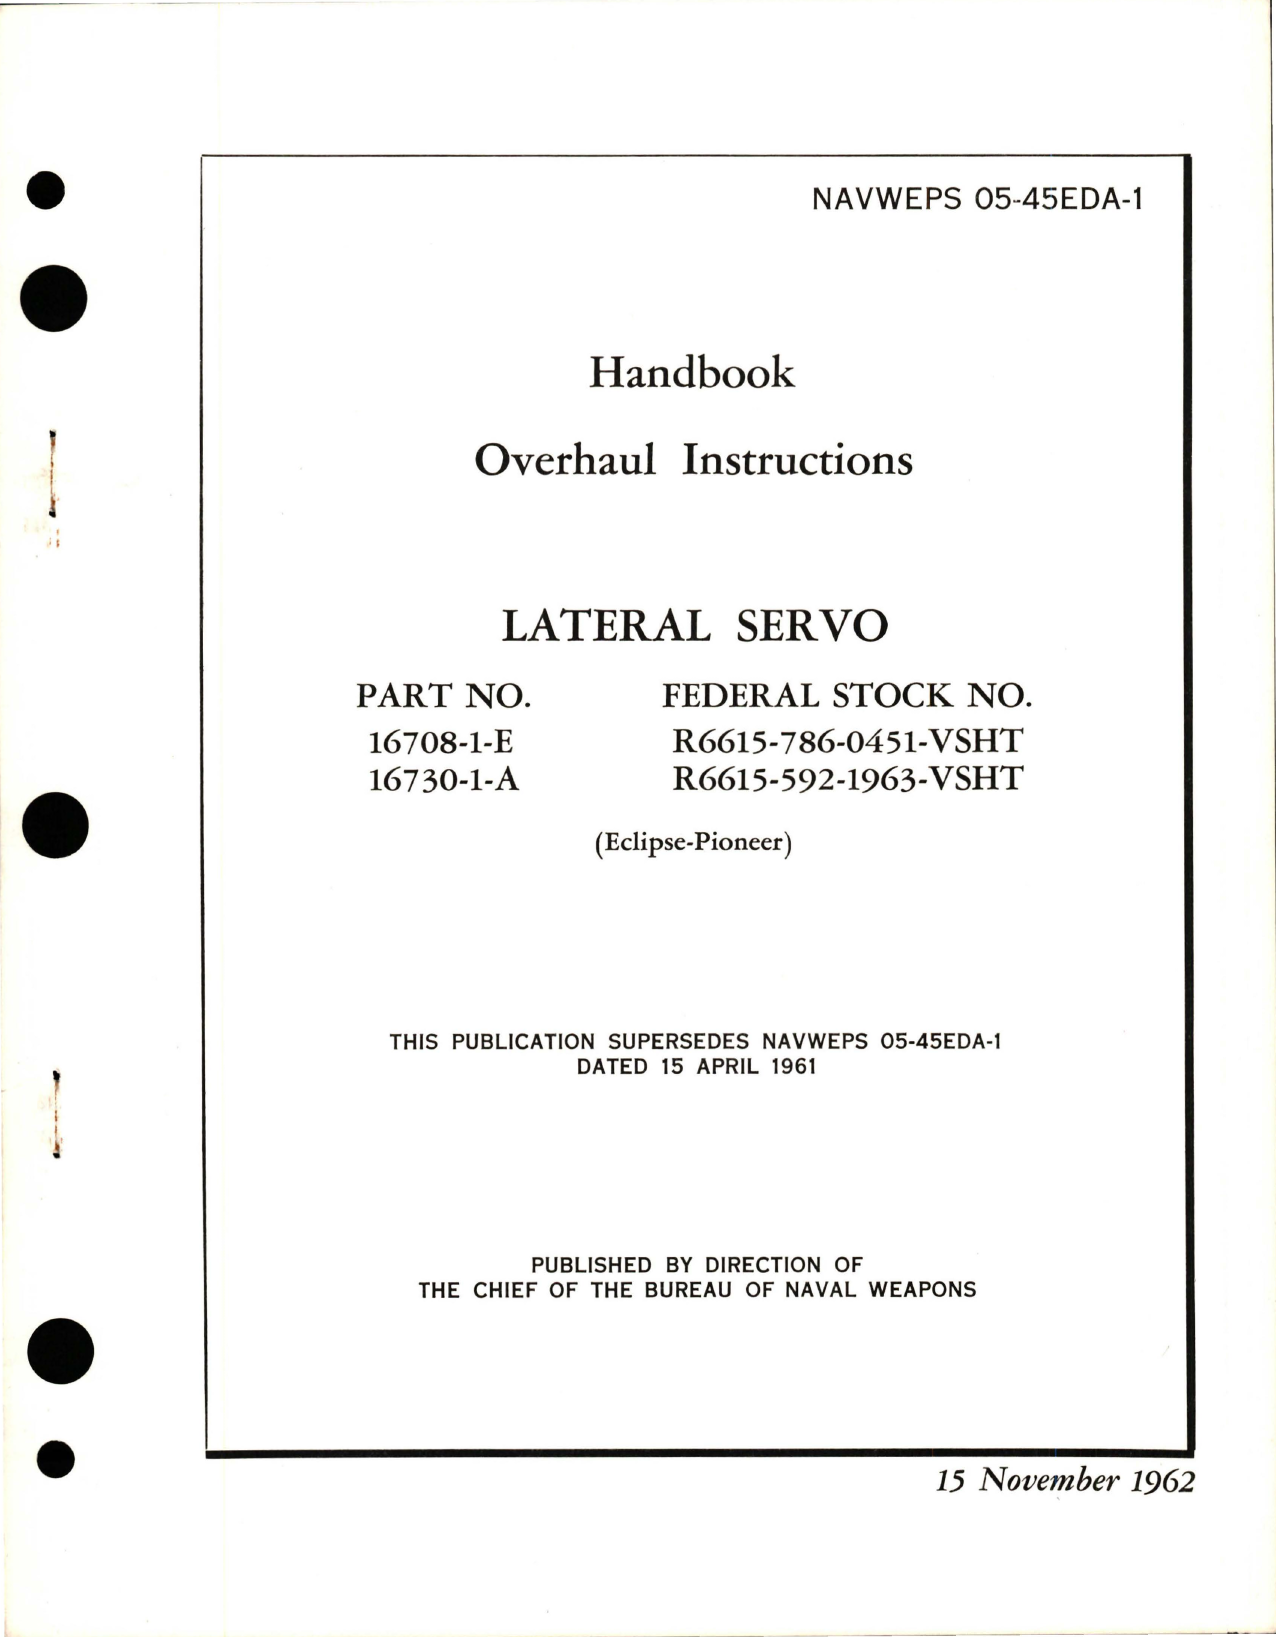 Sample page 1 from AirCorps Library document: Overhaul Instructions for Lateral Servo - Parts 16708-1-E and16730-1-A